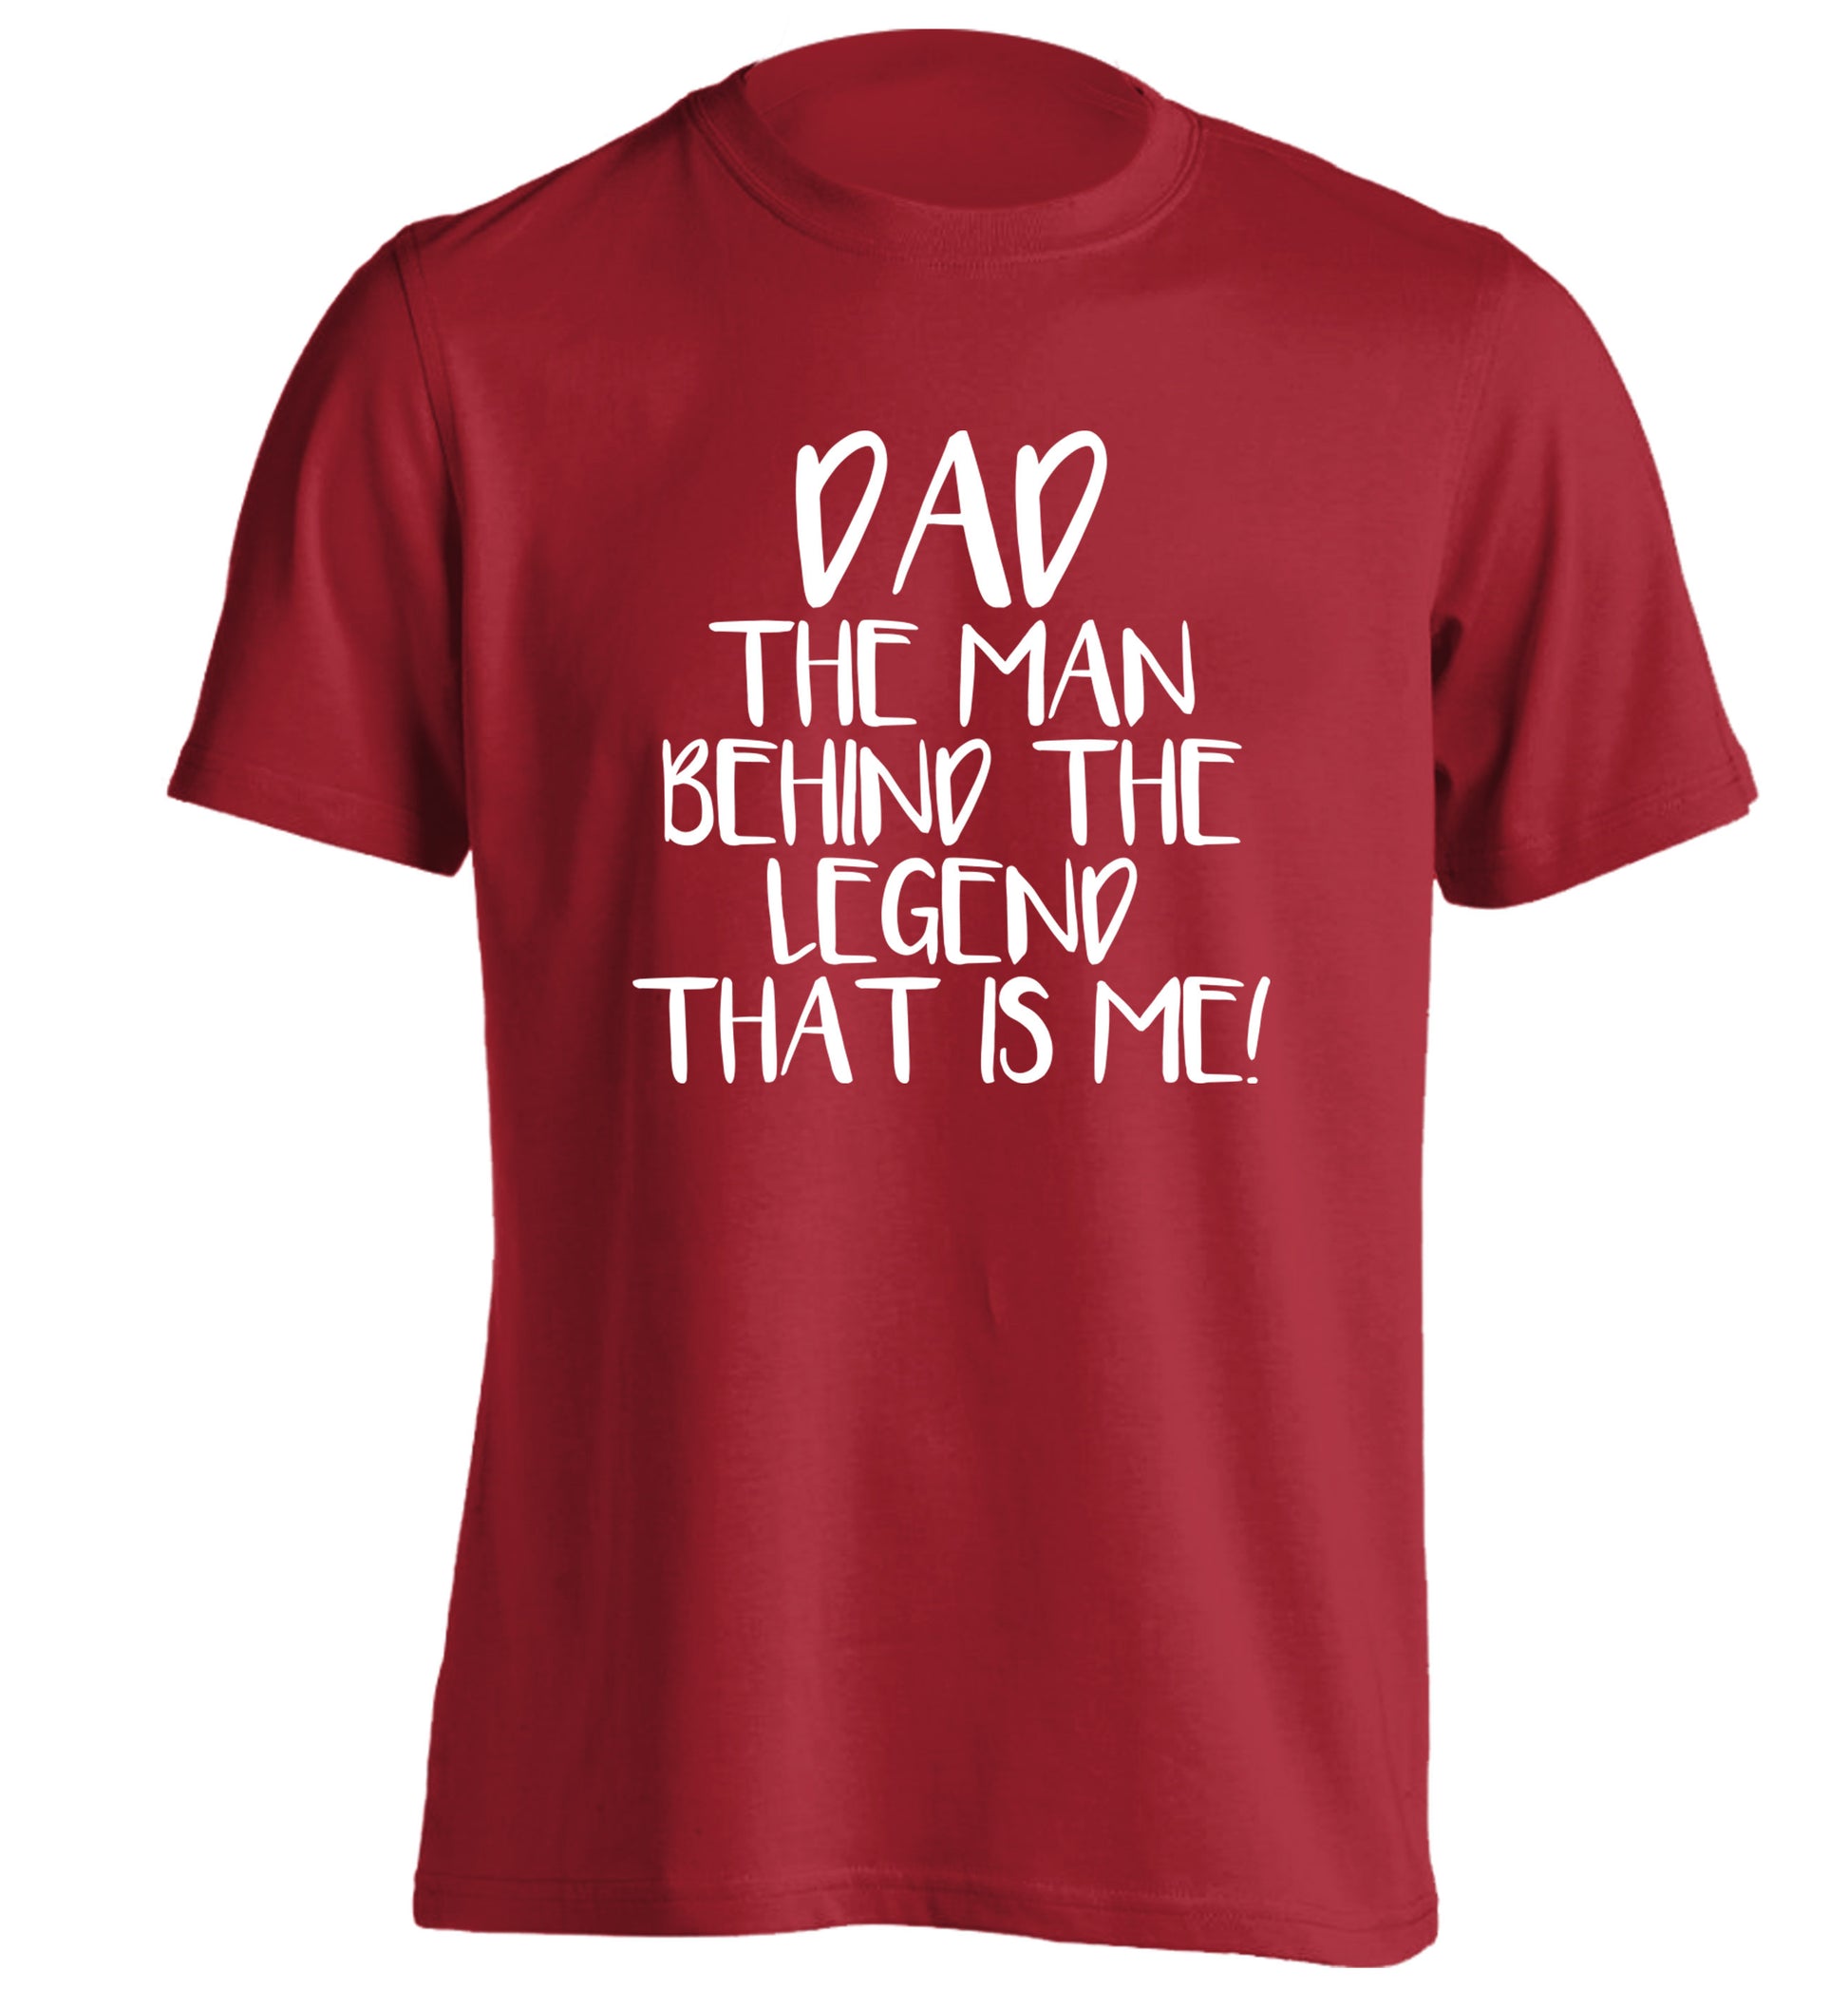 Dad the man behind the legend that is me! adults unisex red Tshirt 2XL